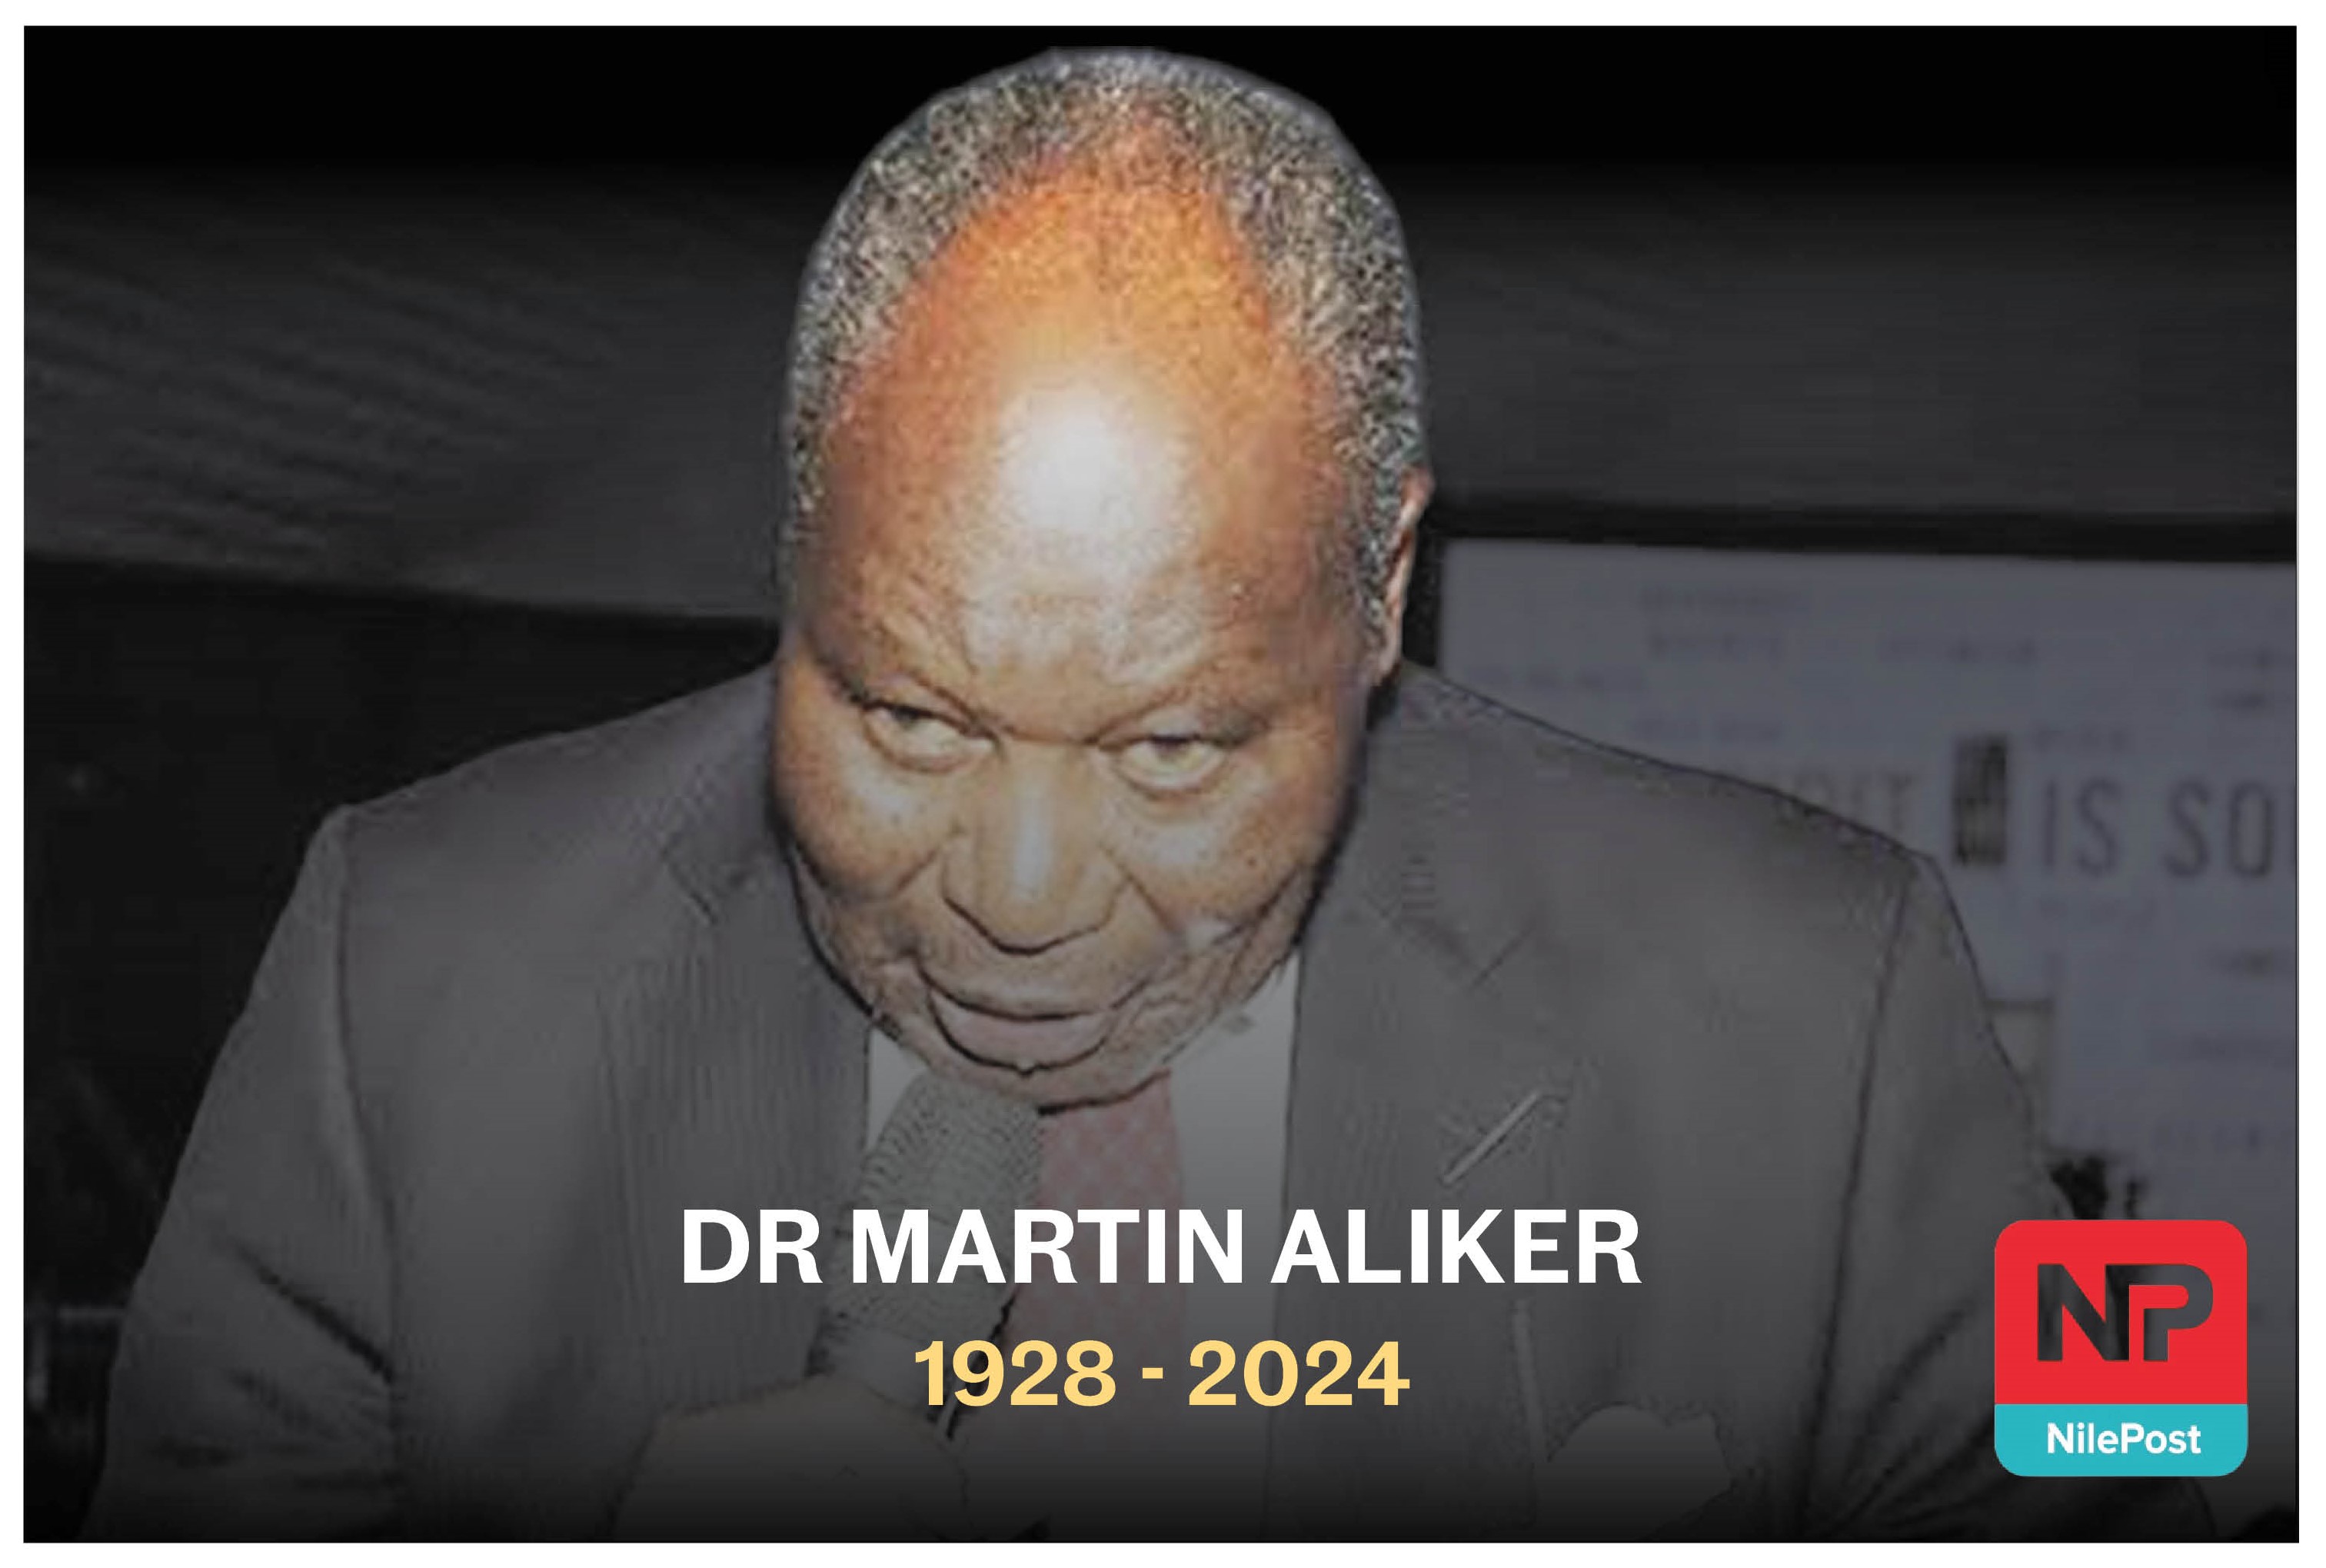 Victoria University pays tribute to former chancellor Martin Aliker